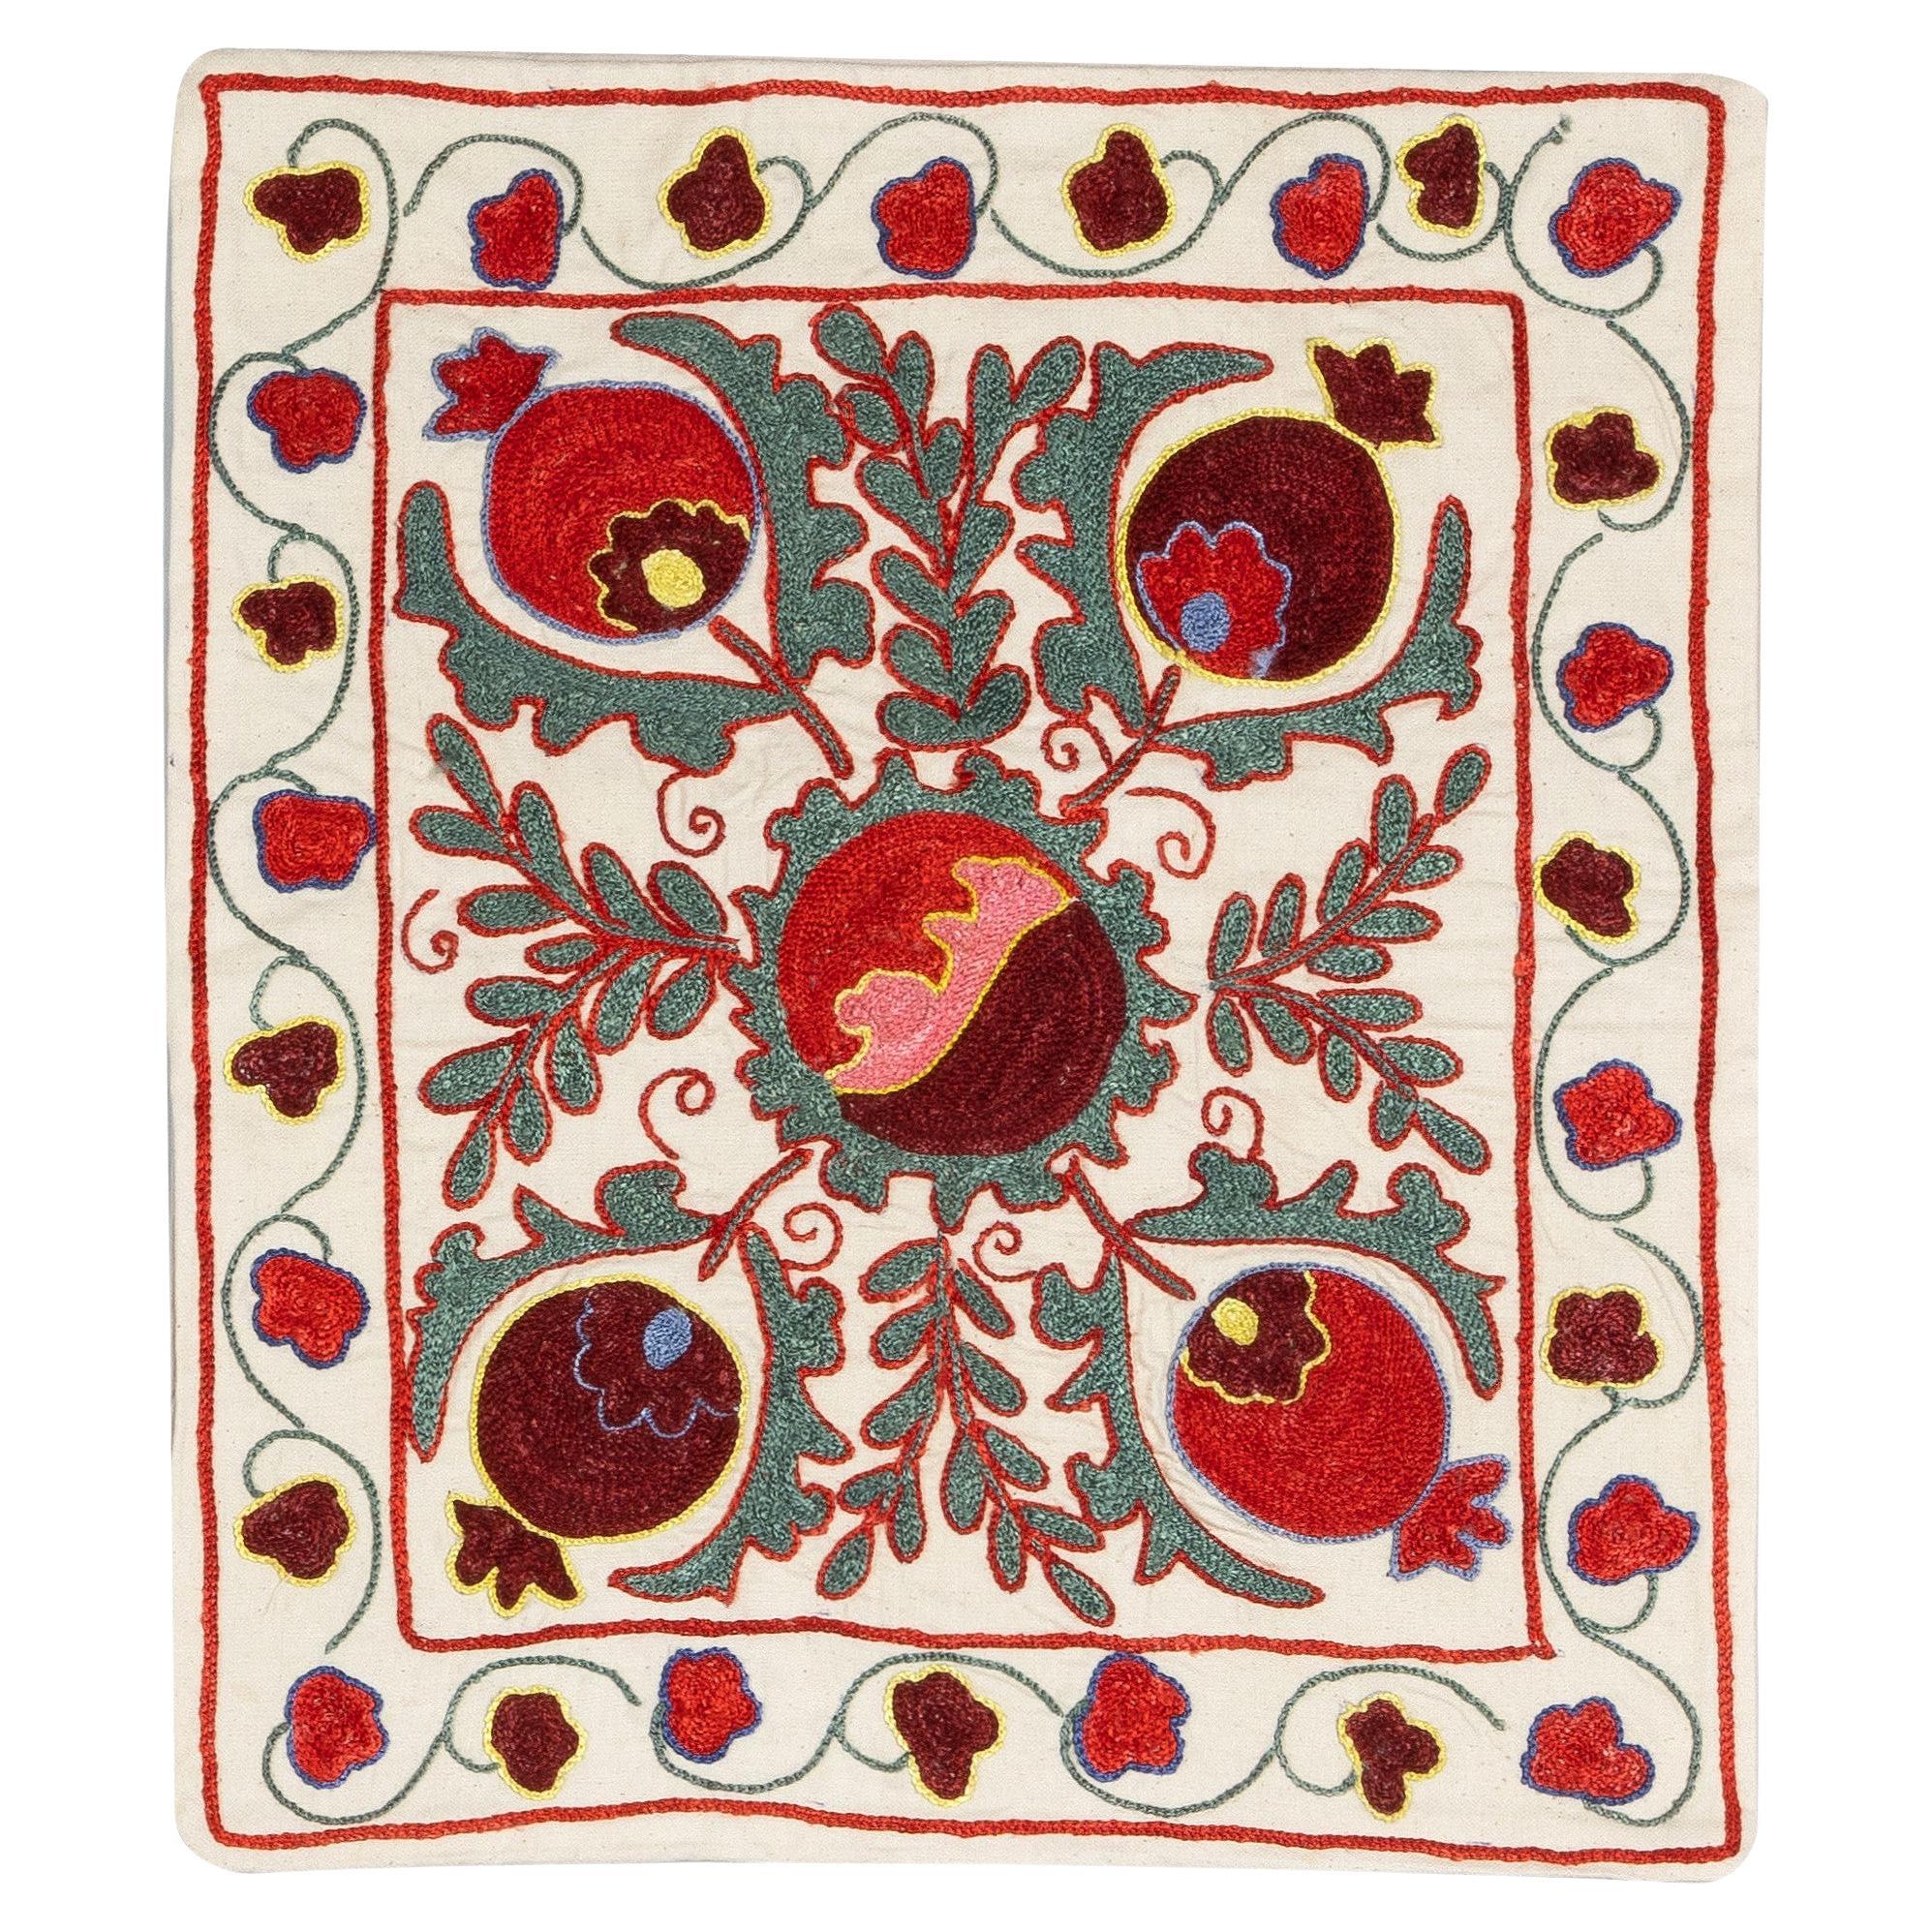 19"x19" Decorative Silk Embroidered Suzani Cushion Cover in Red, Green and Cream